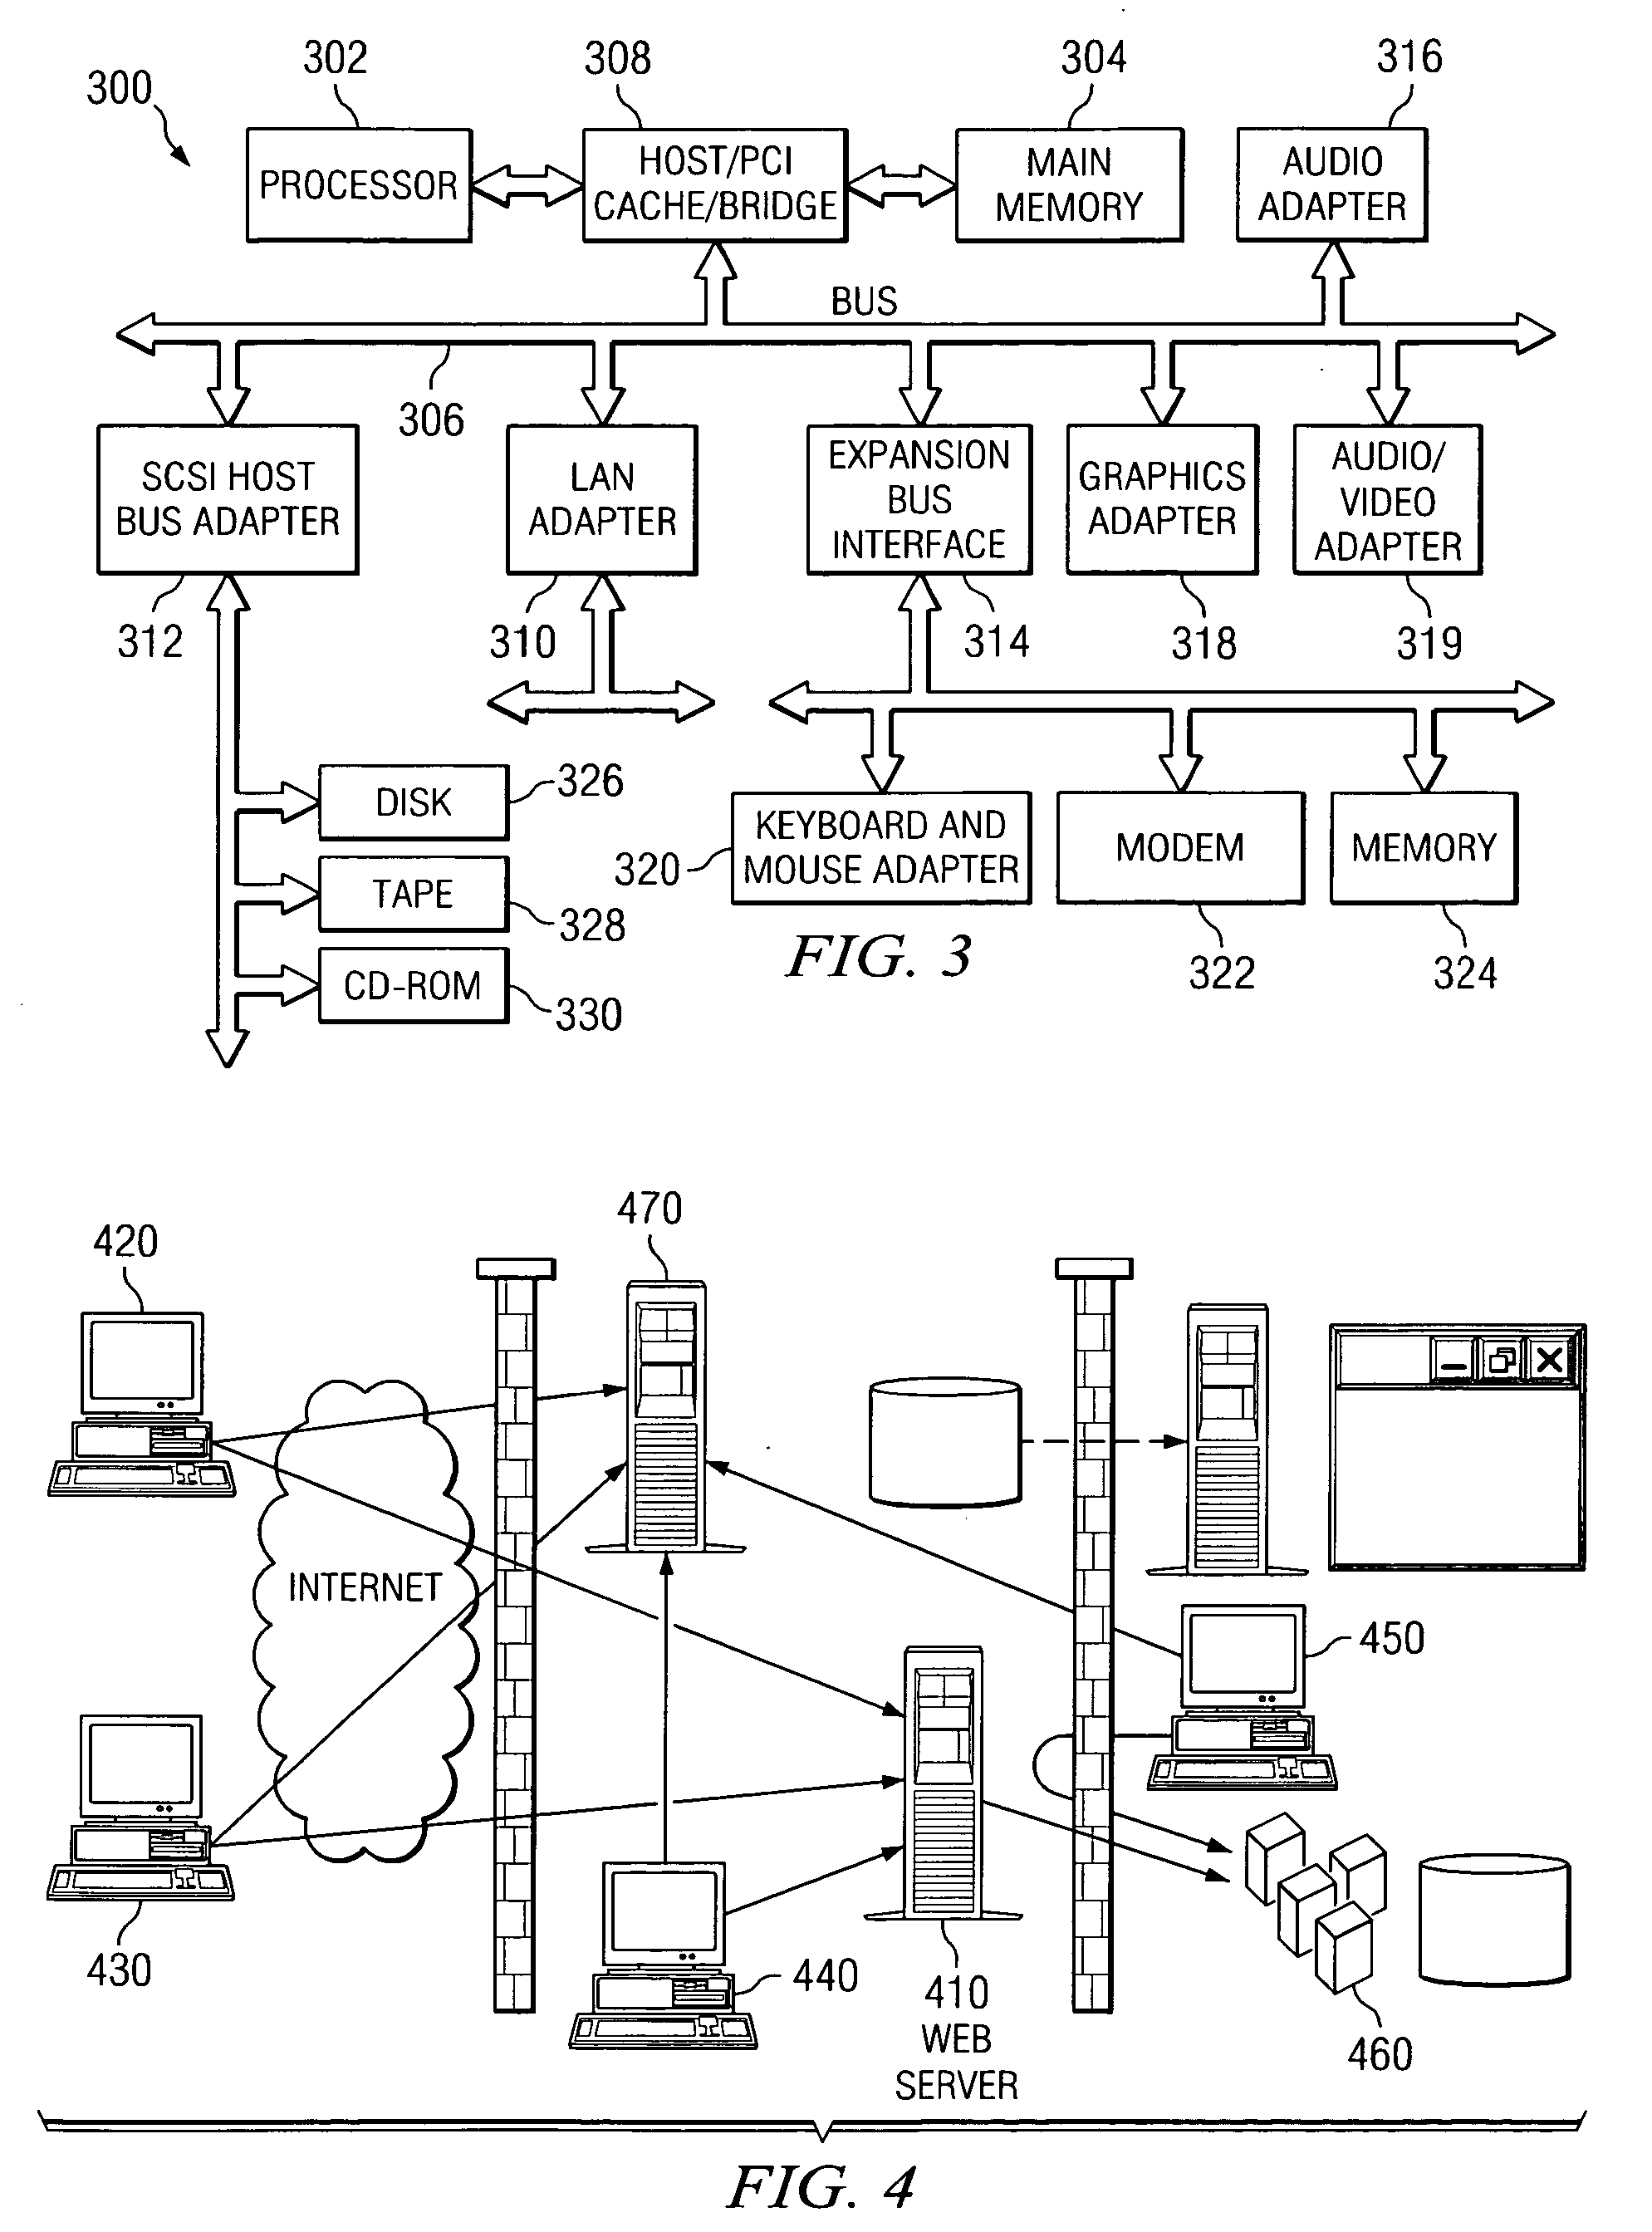 Method and apparatus for redirecting transactions based on transaction response time policy in a distributed environment